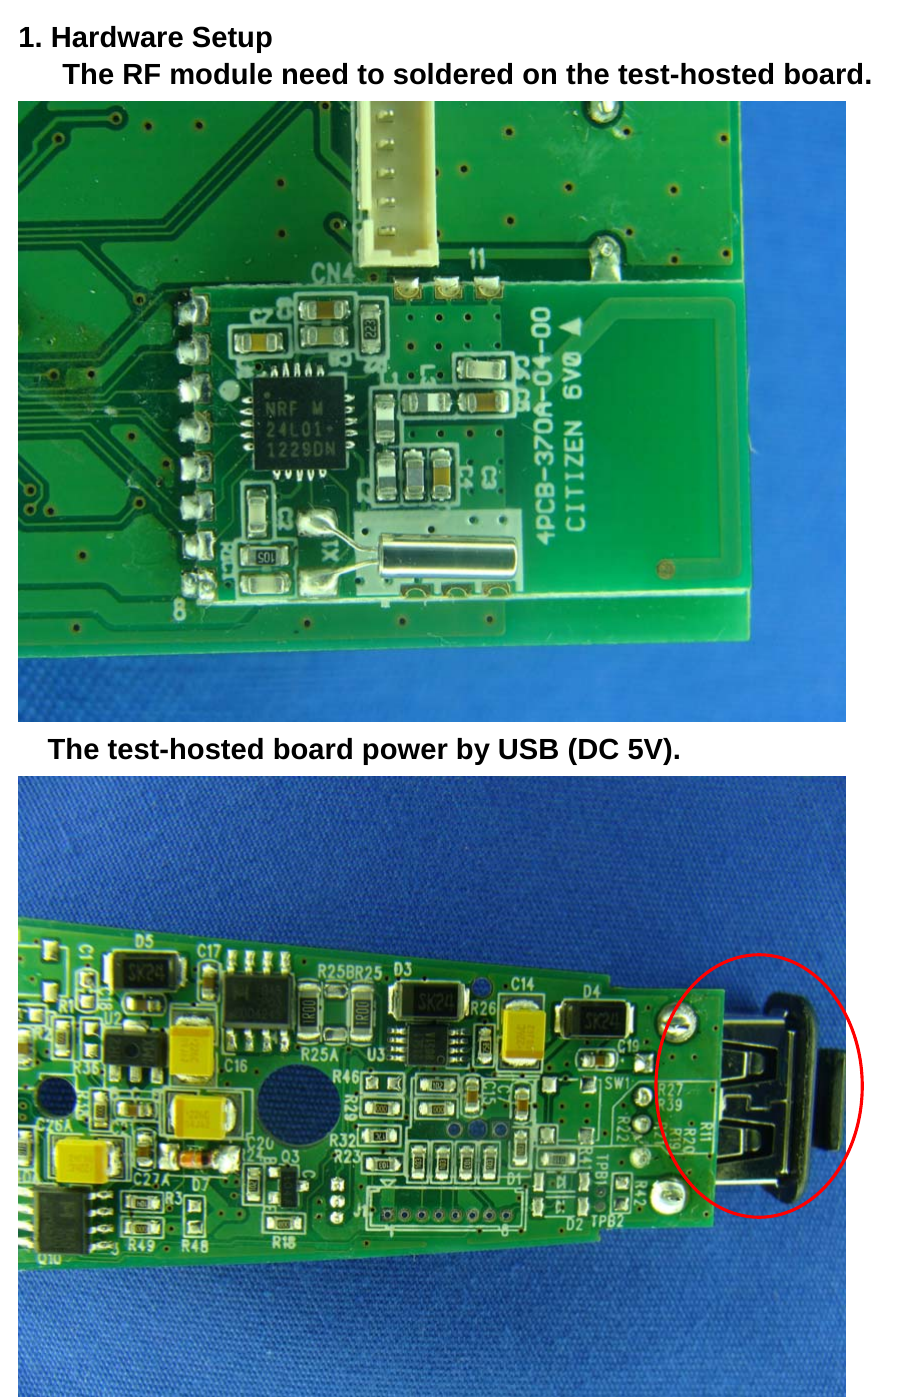  1. Hardware Setup       The RF module need to soldered on the test-hosted board.    The test-hosted board power by USB (DC 5V).        